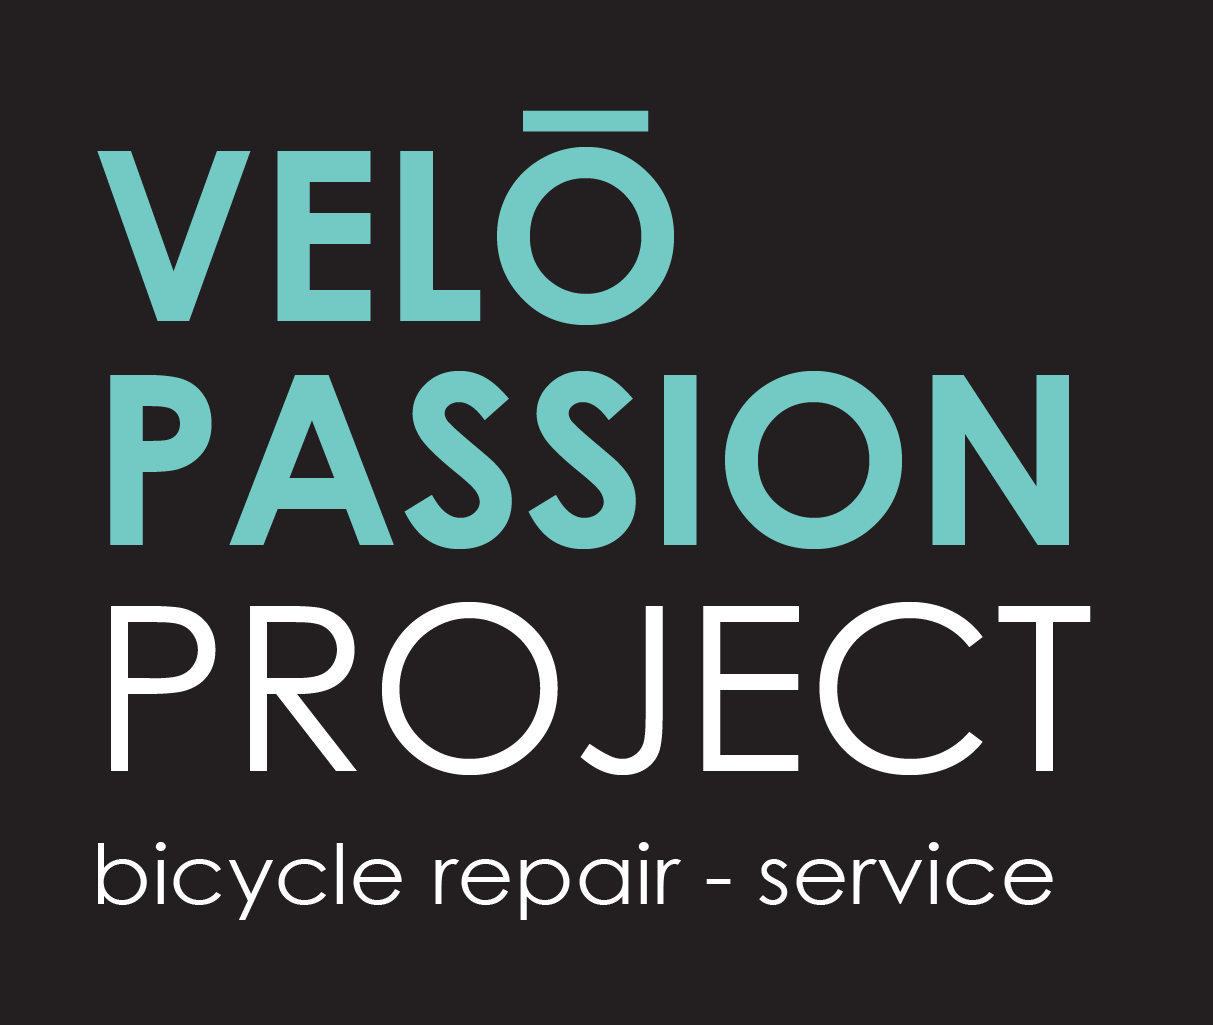 Velo Passion Project